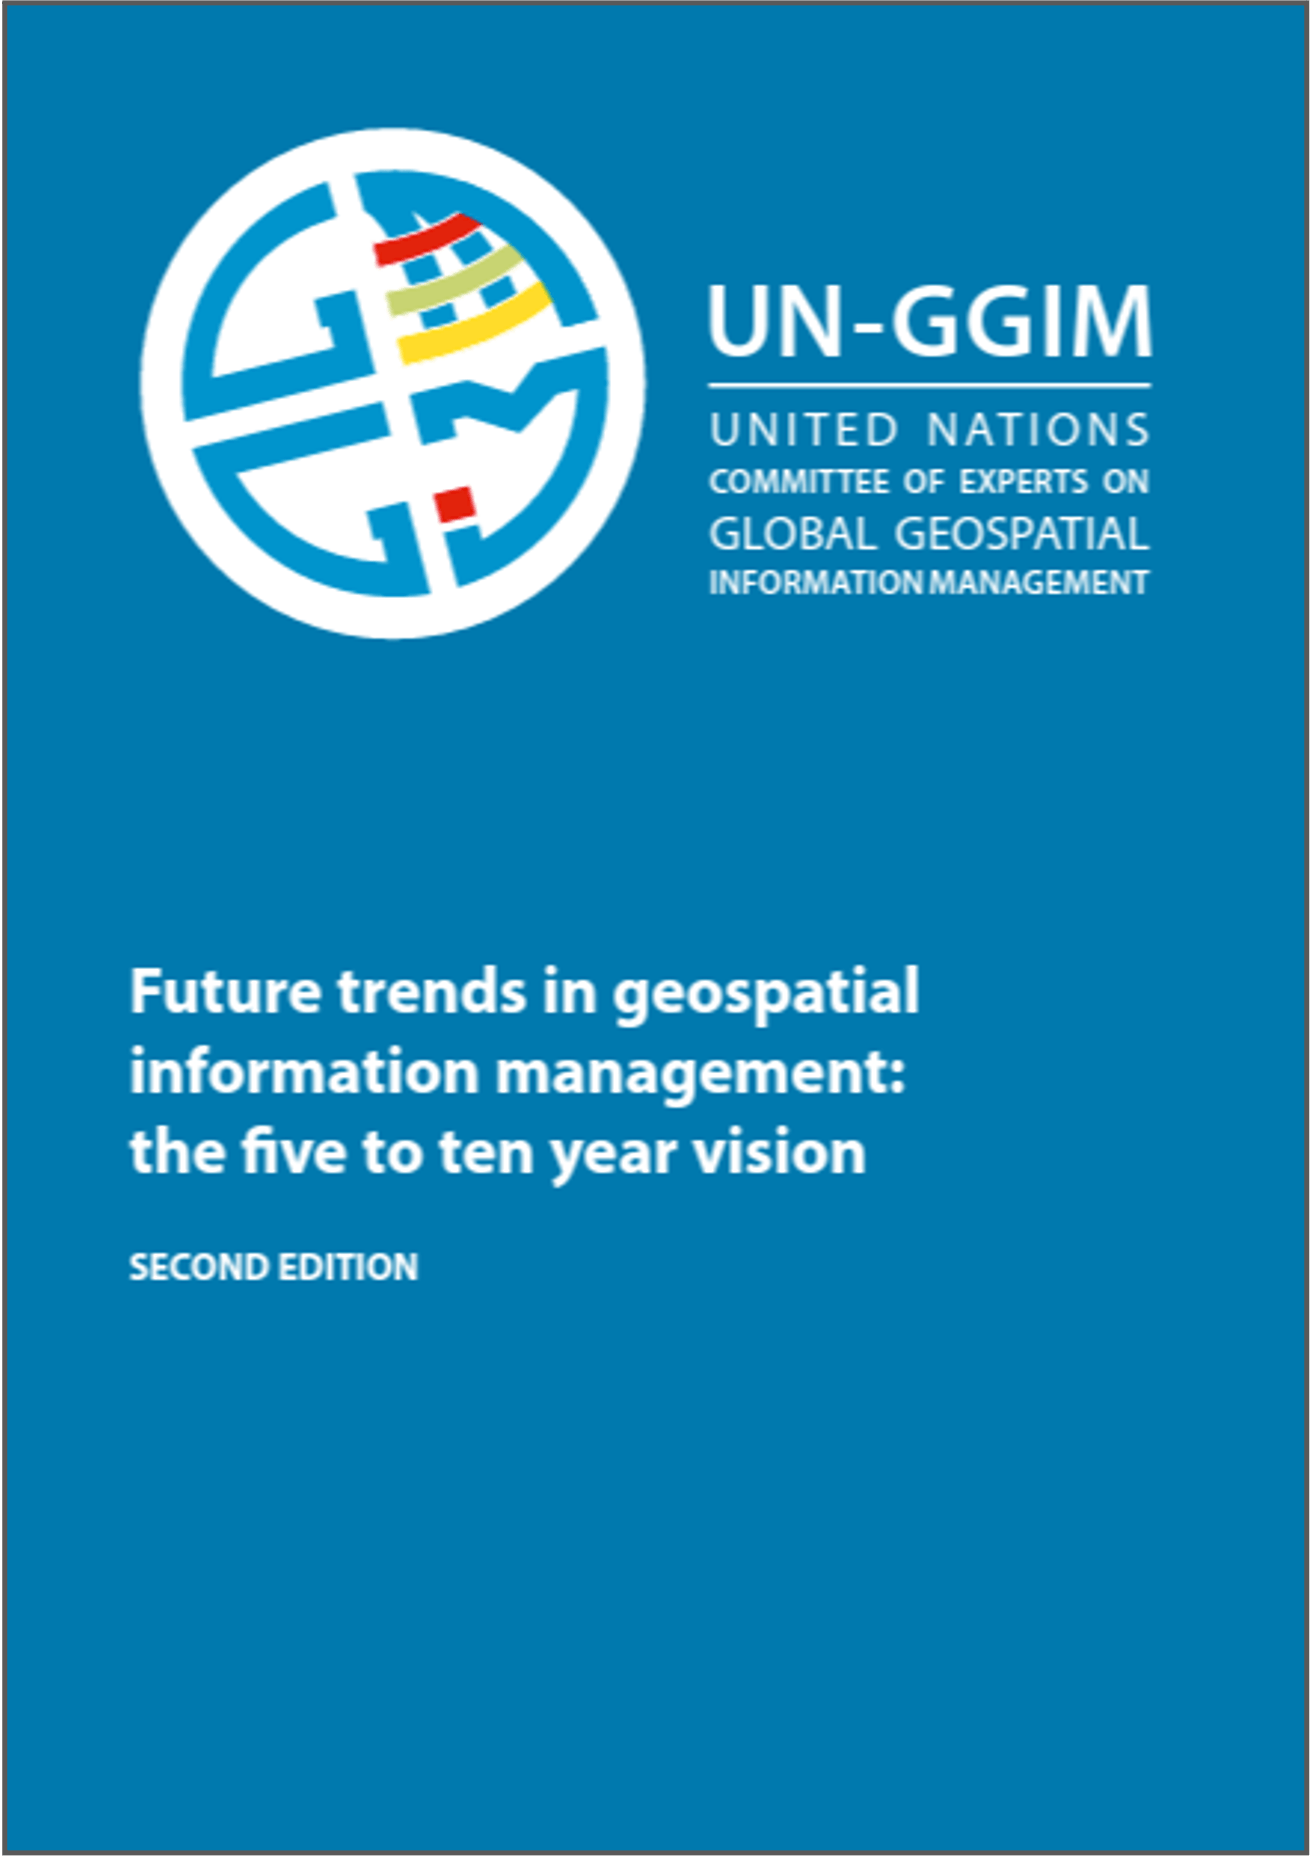 Future trends in geospatial information management: the five to ten year vision